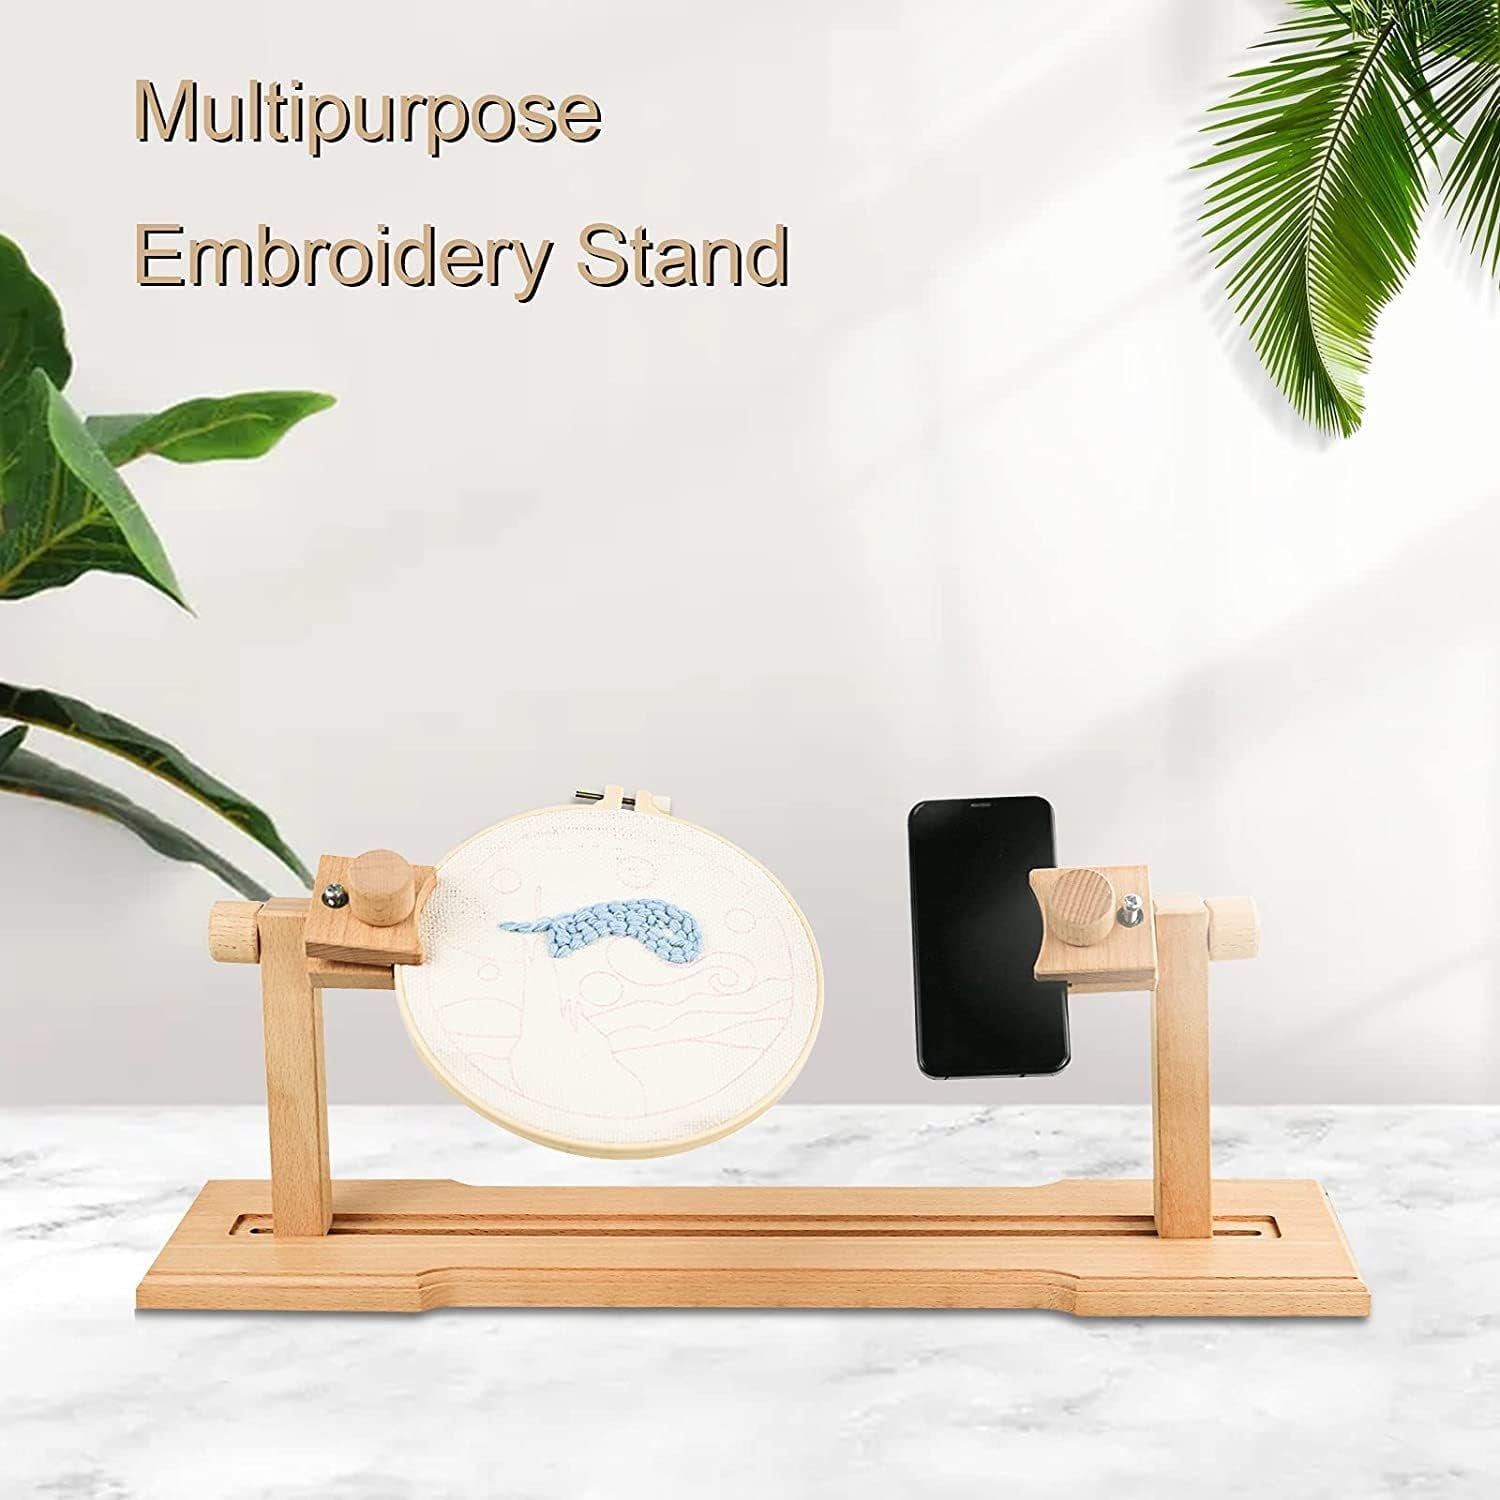 Wooden Embroidery Stand 360 Rotating Adjustable Desktop Stand